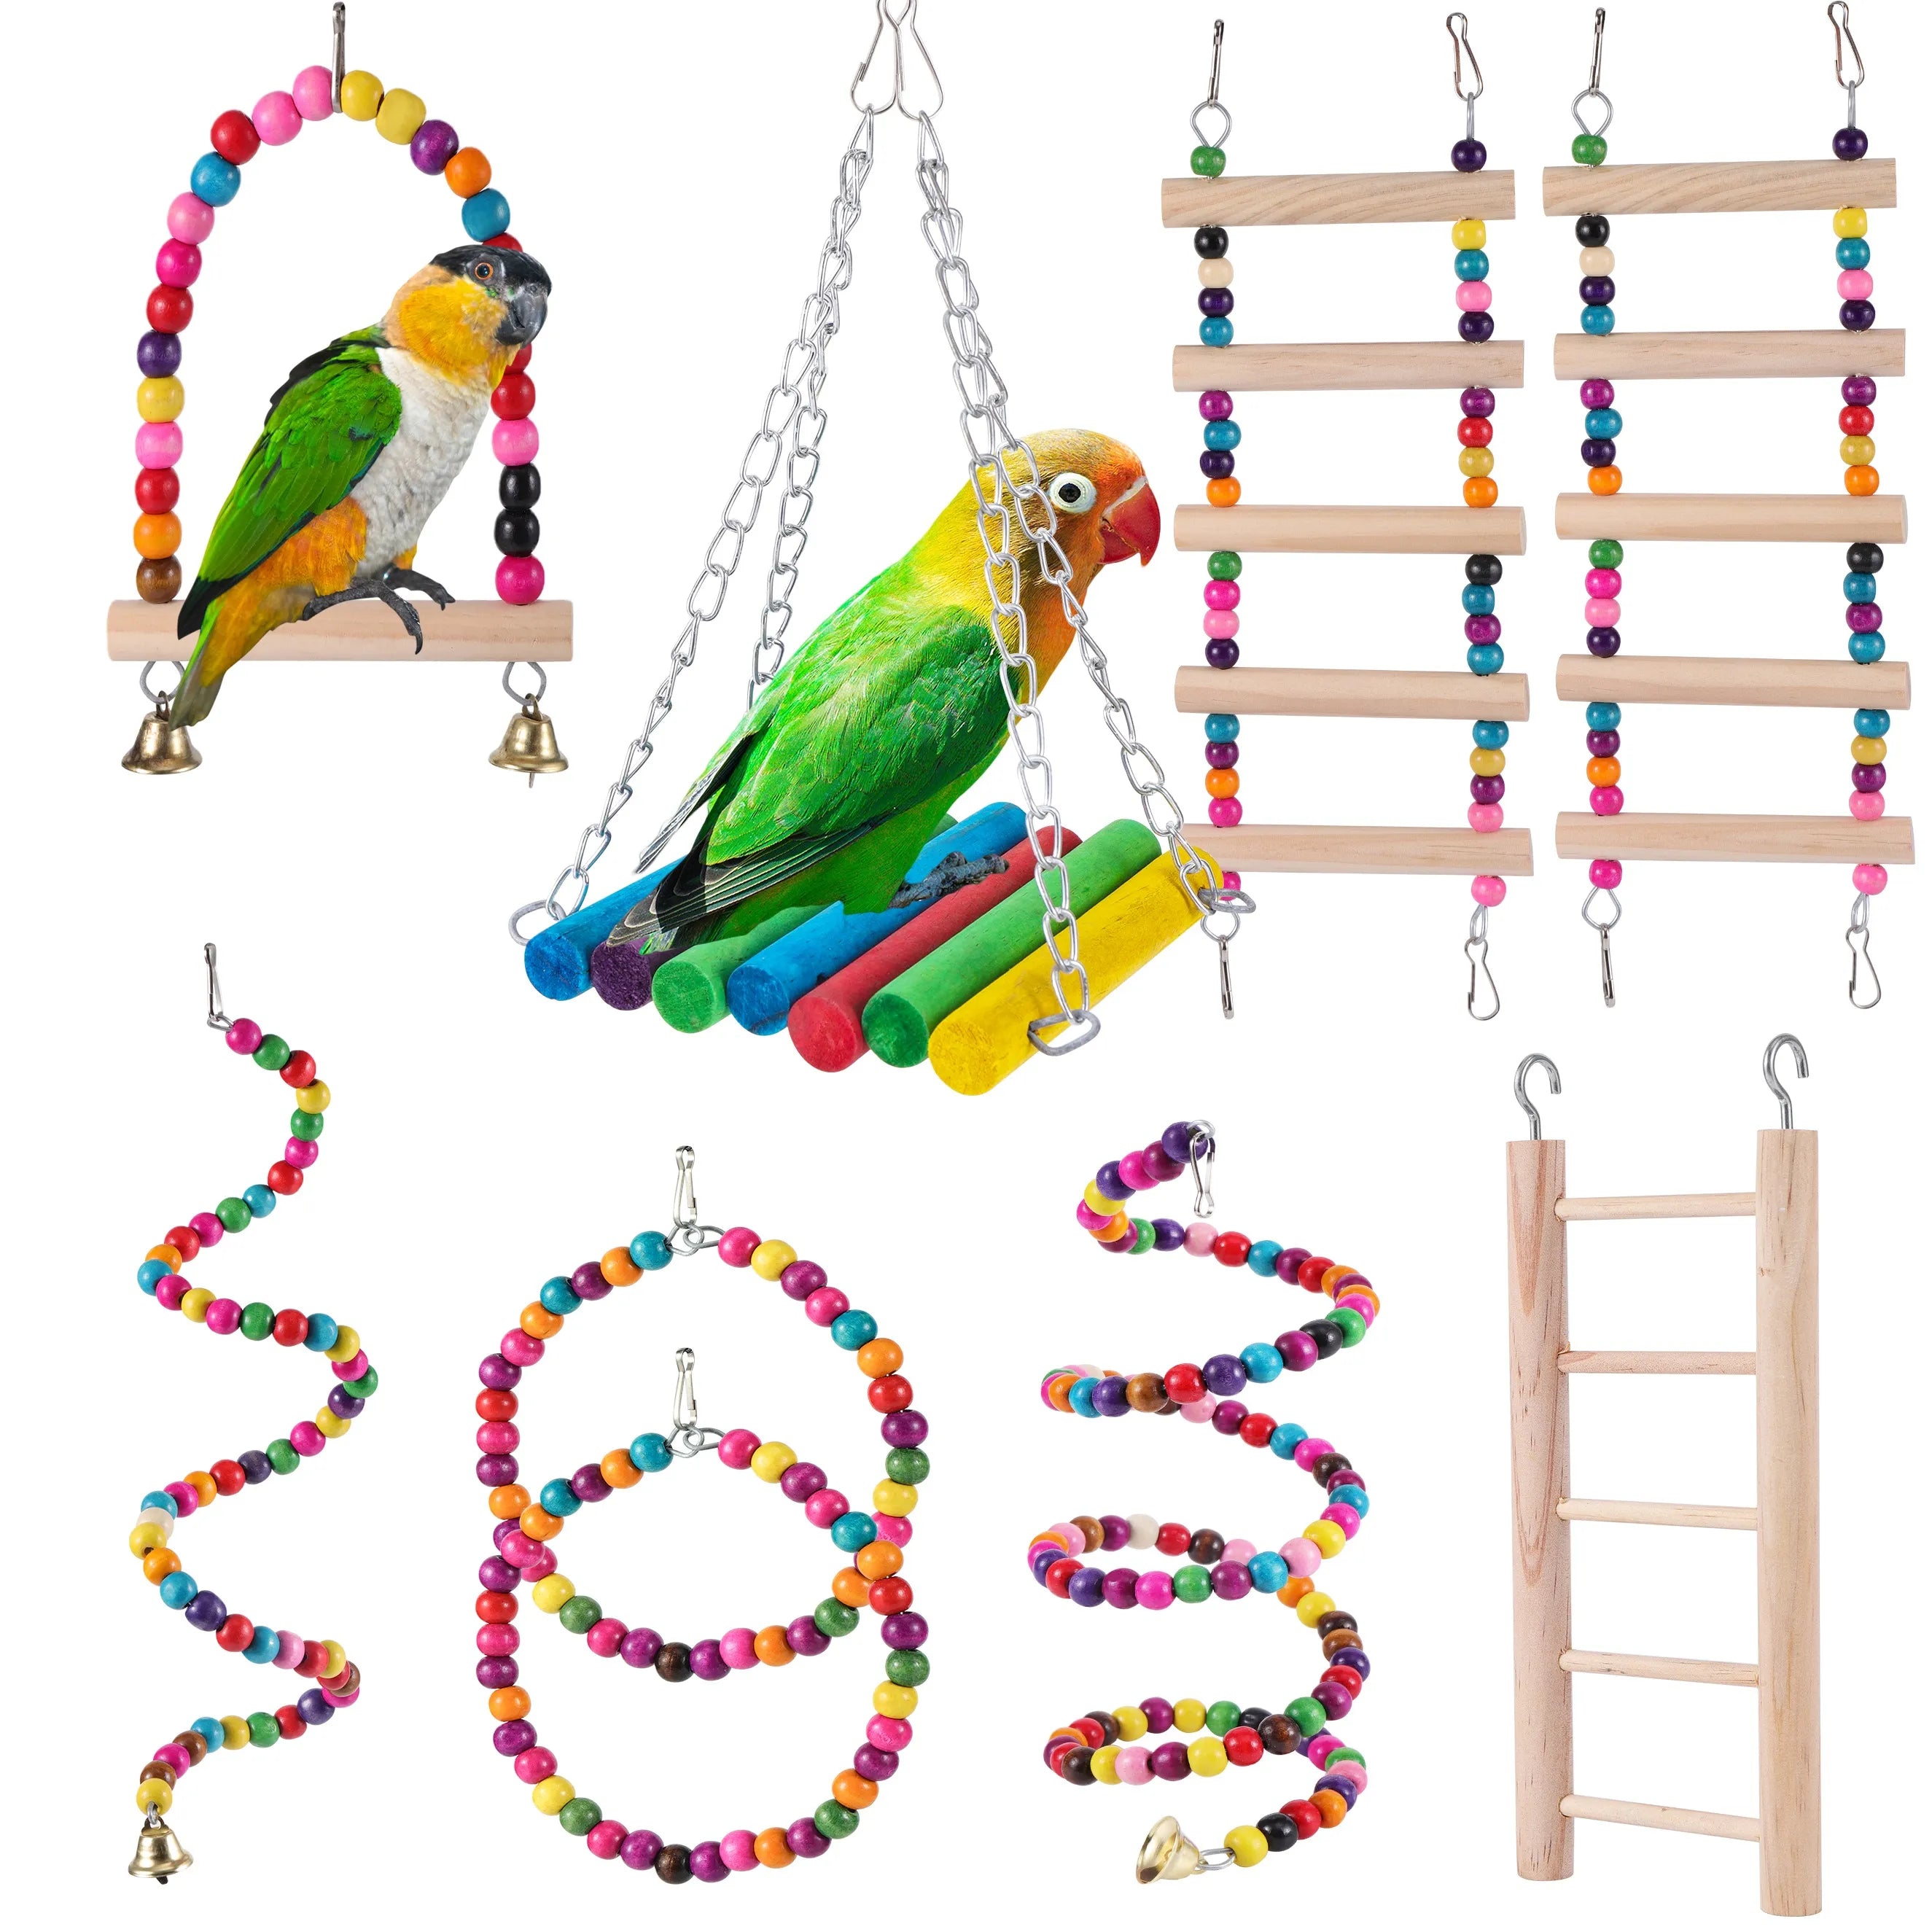 Parrot Swing & Chew Toys Set: Diverse, Safe, Multi-Functional & Easy Installation  petlums.com   